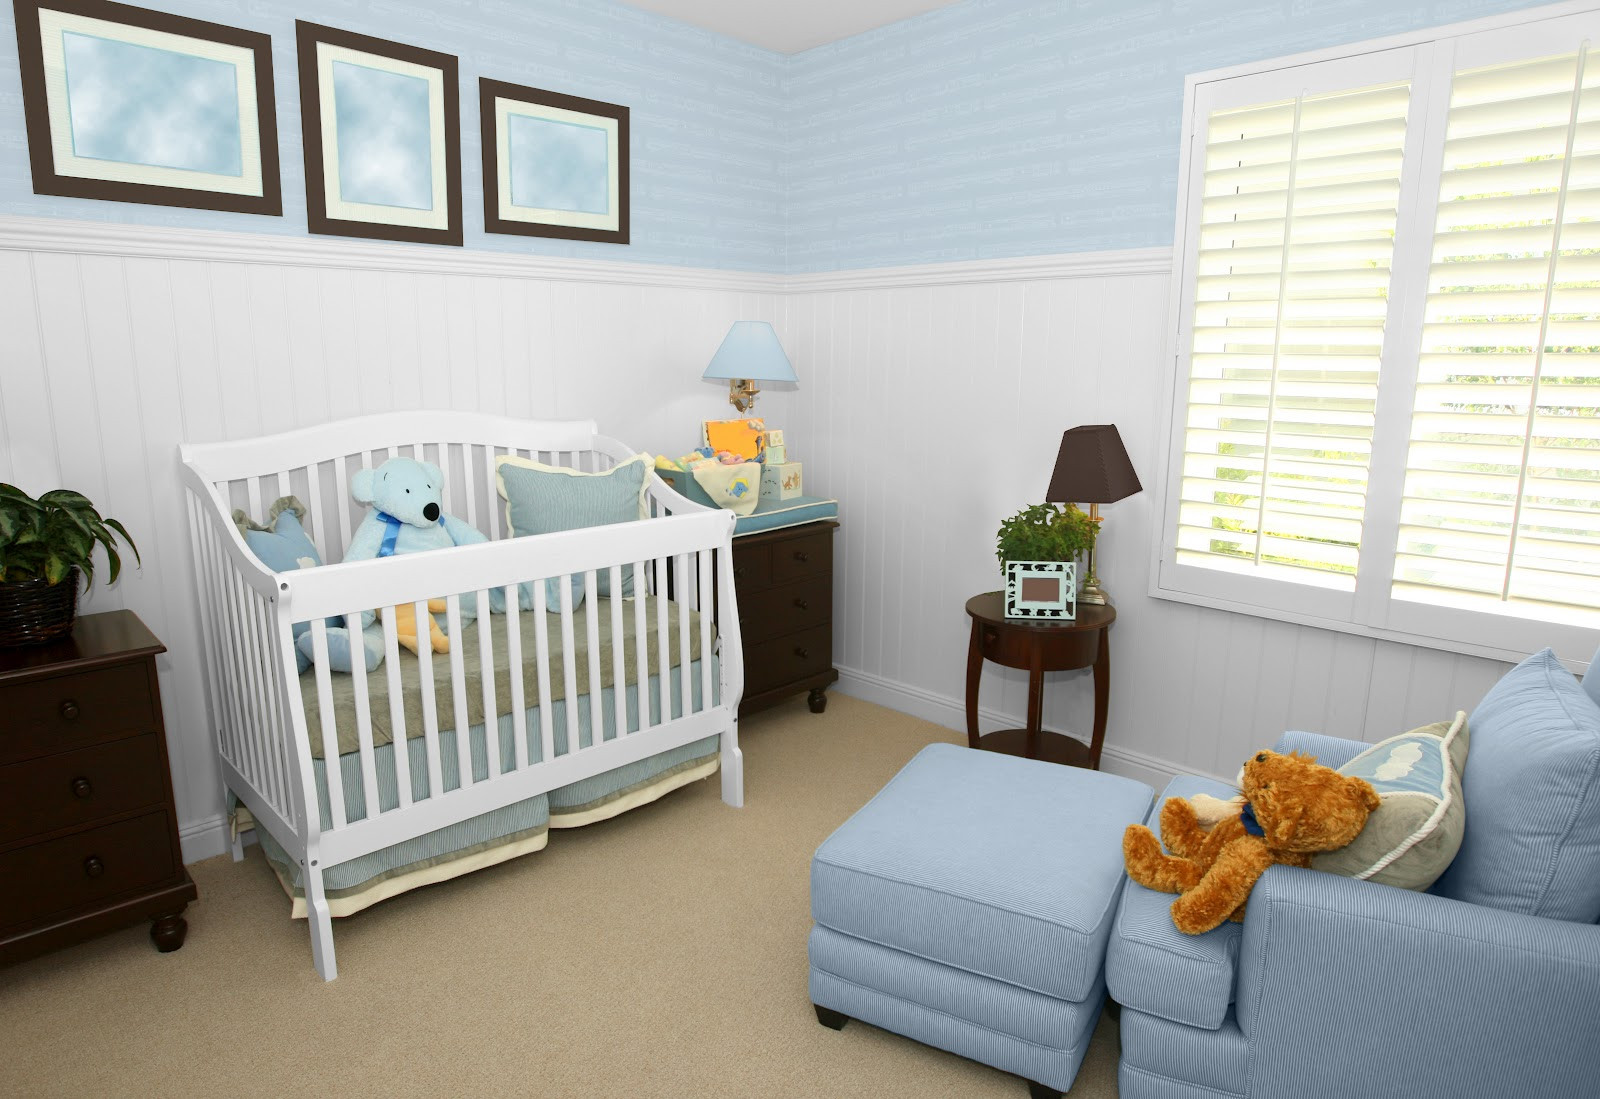 Room Decor For Baby
 Top 10 Baby Nursery Room Colors And Decorating Ideas